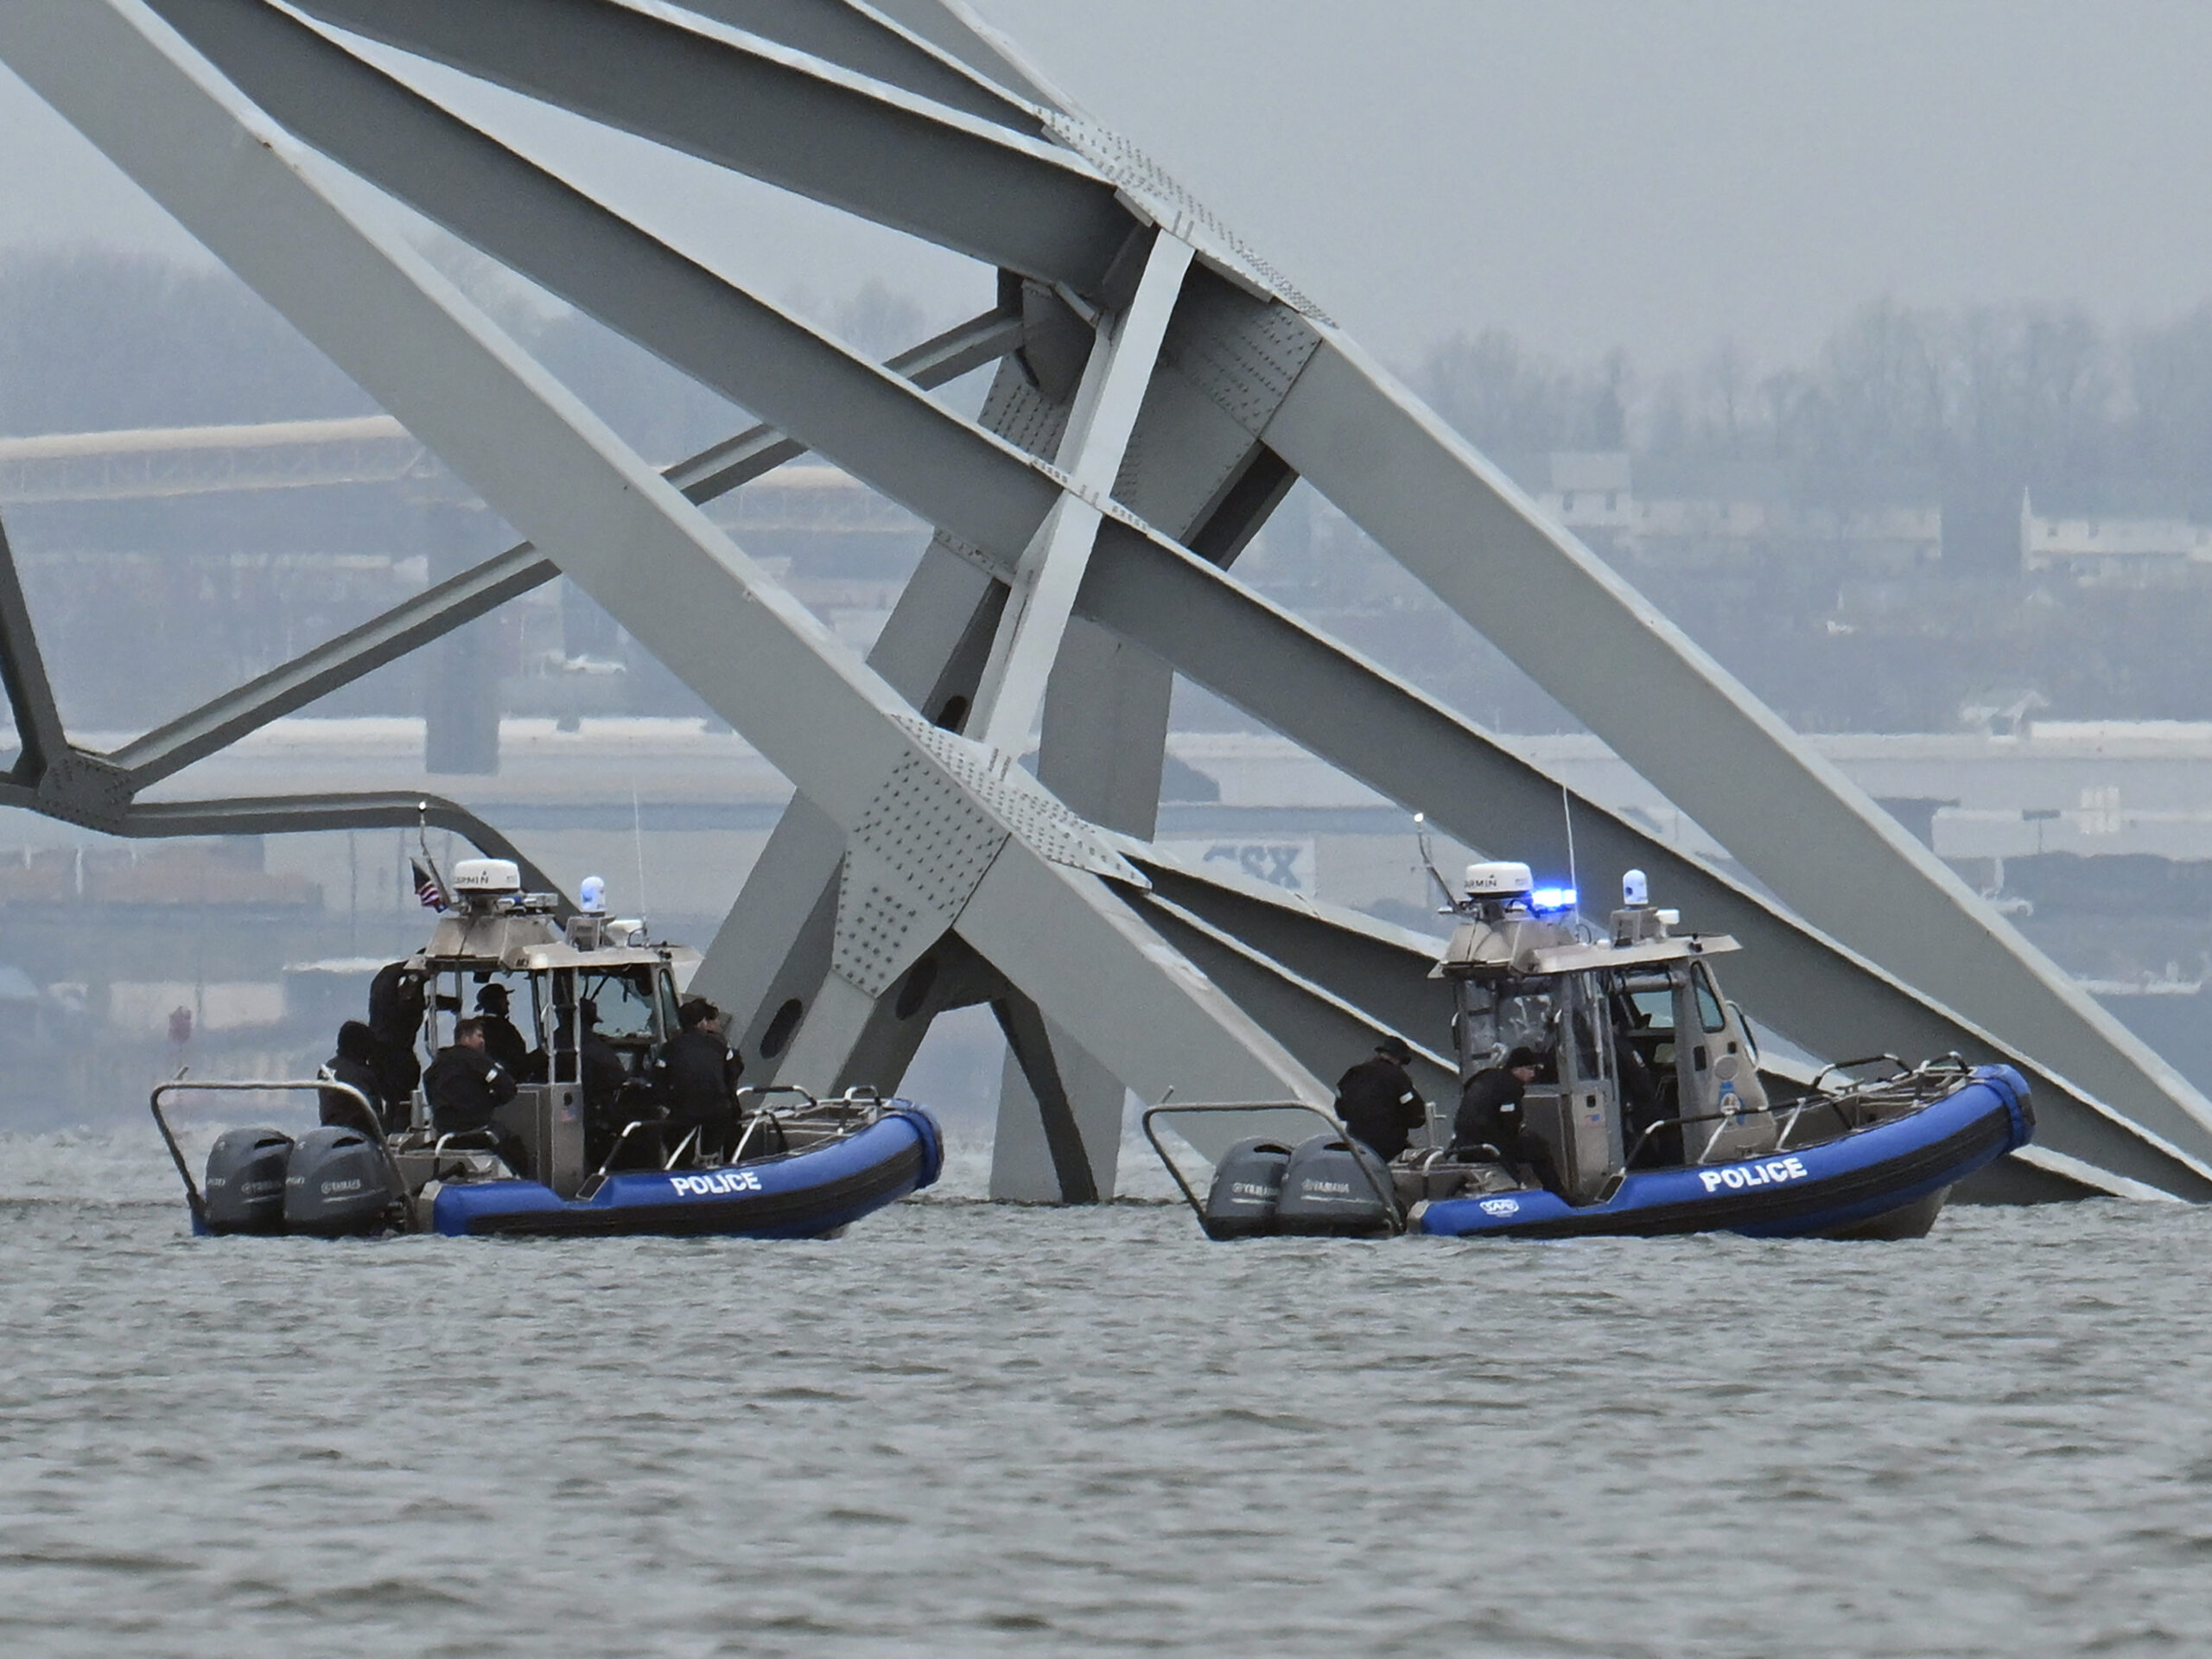 Police recovery crews work near the collapsed Francis Scott Key Bridge after it was struck by the container ship Dali in Baltimore, Maryland.   Eight members of a construction crew repairing potholes were on the bridge when the structure fell into the Patapsco River at around 1:30 am on March 26.